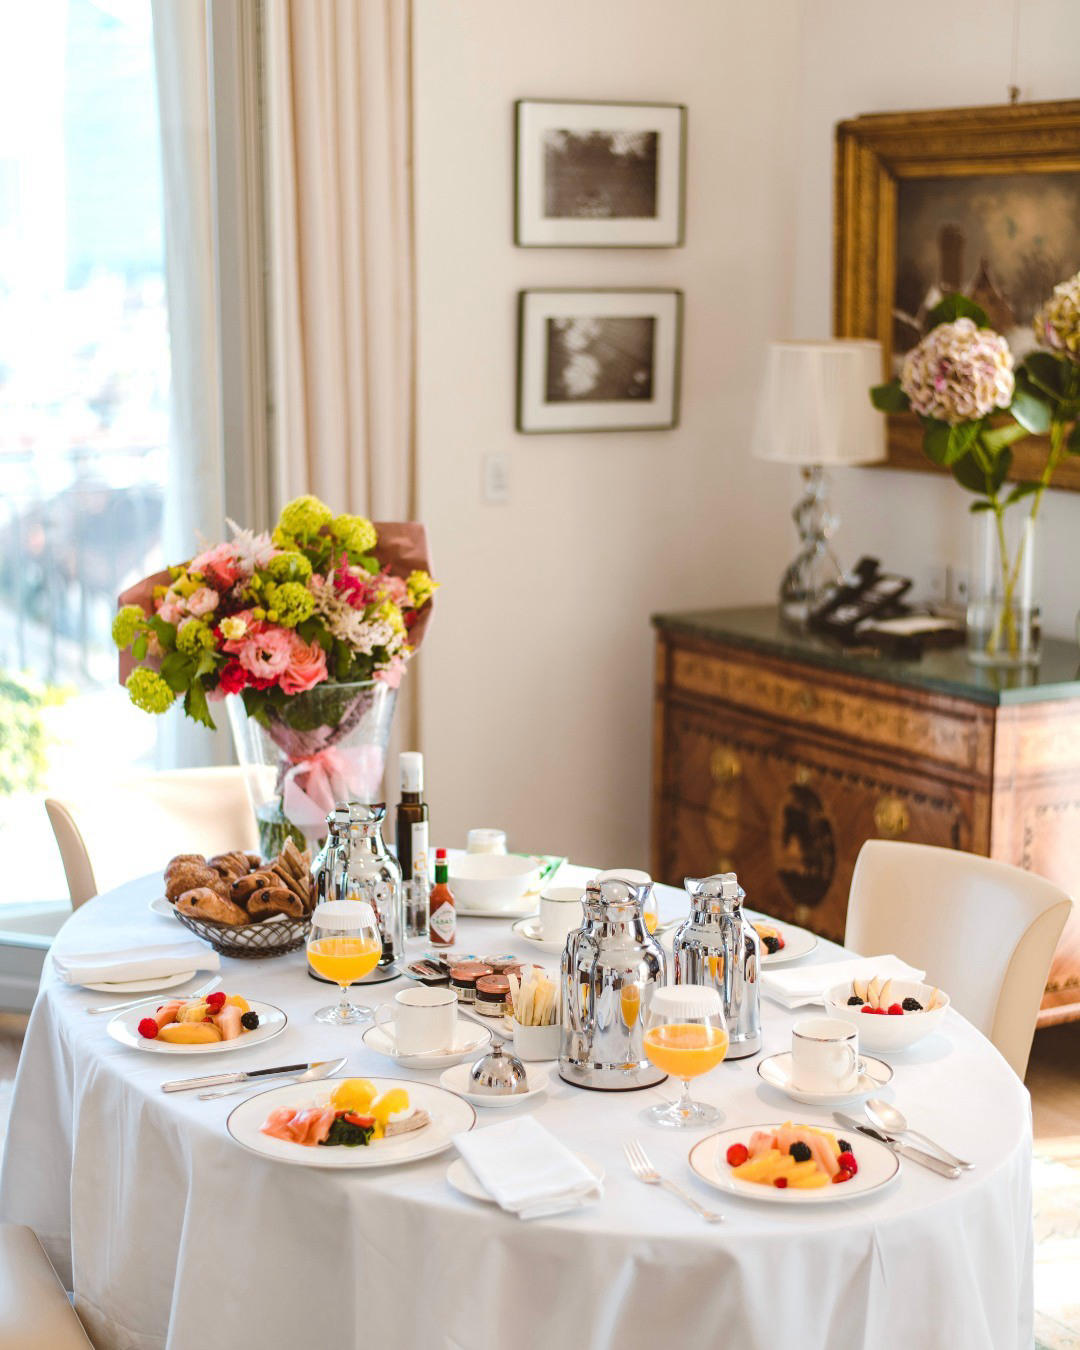 Palazzo Parigi - No need to rush when your breakfast can be delivered to your room